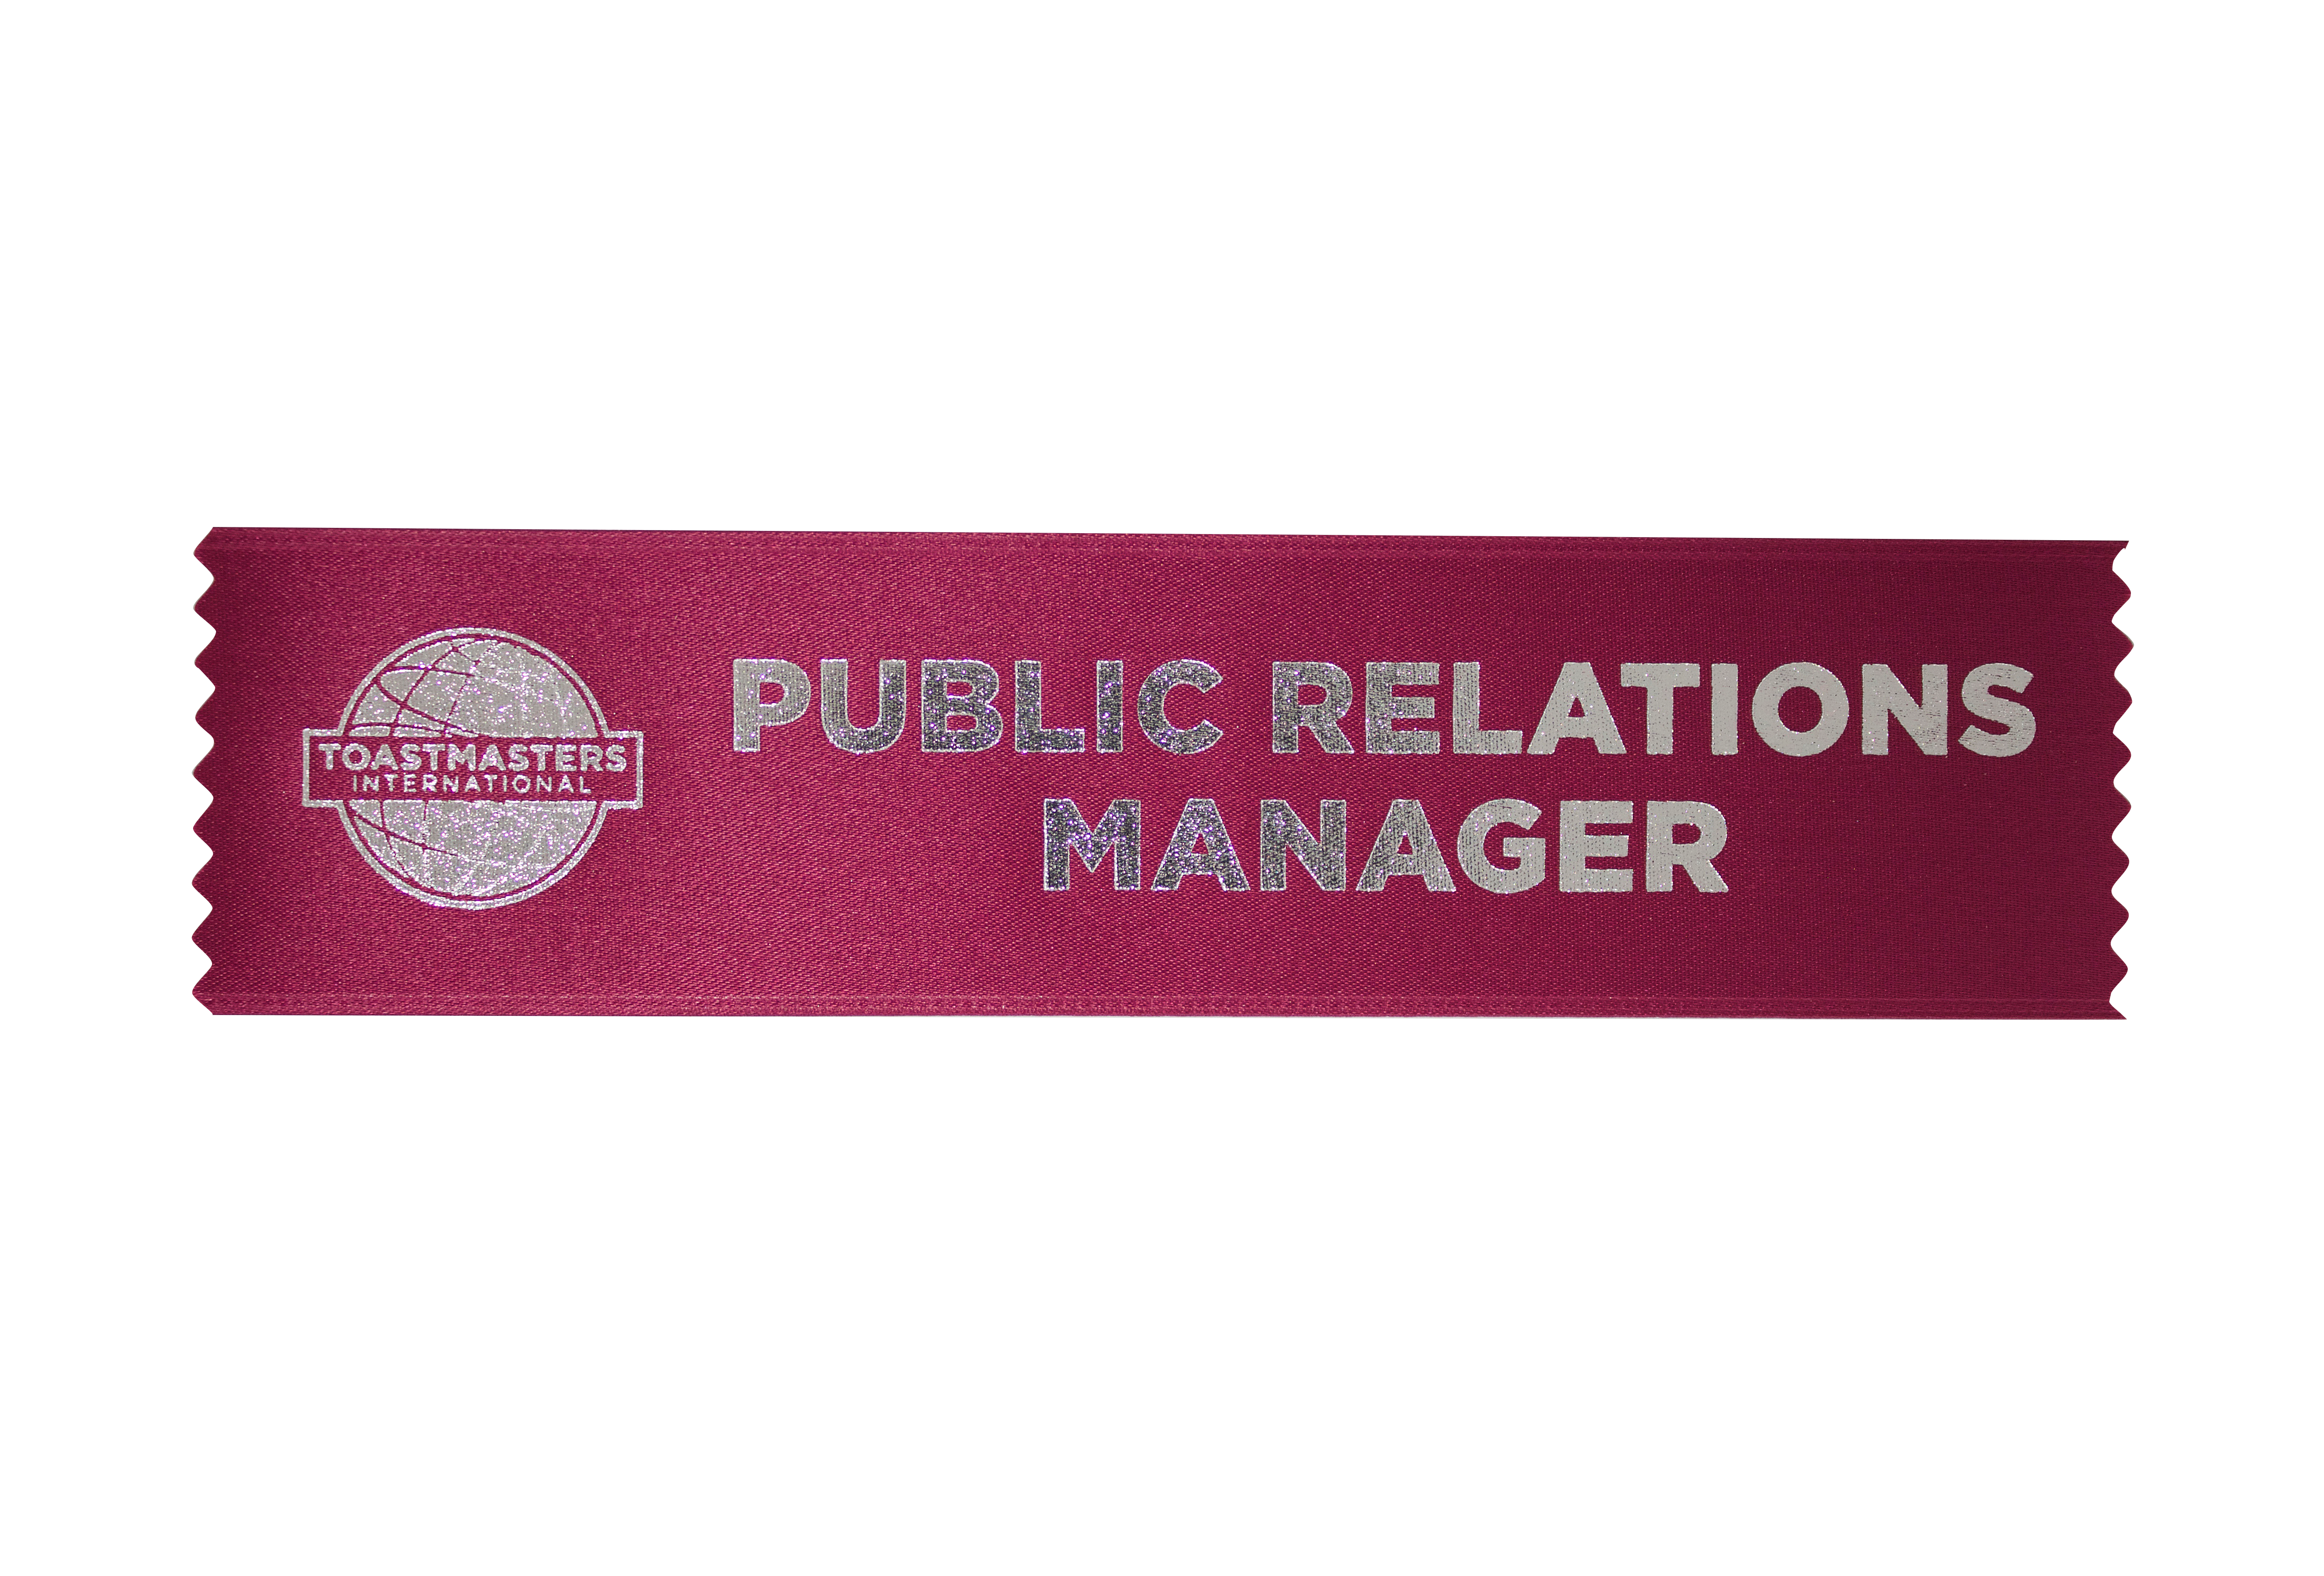 Public Relations Manager Ribbon